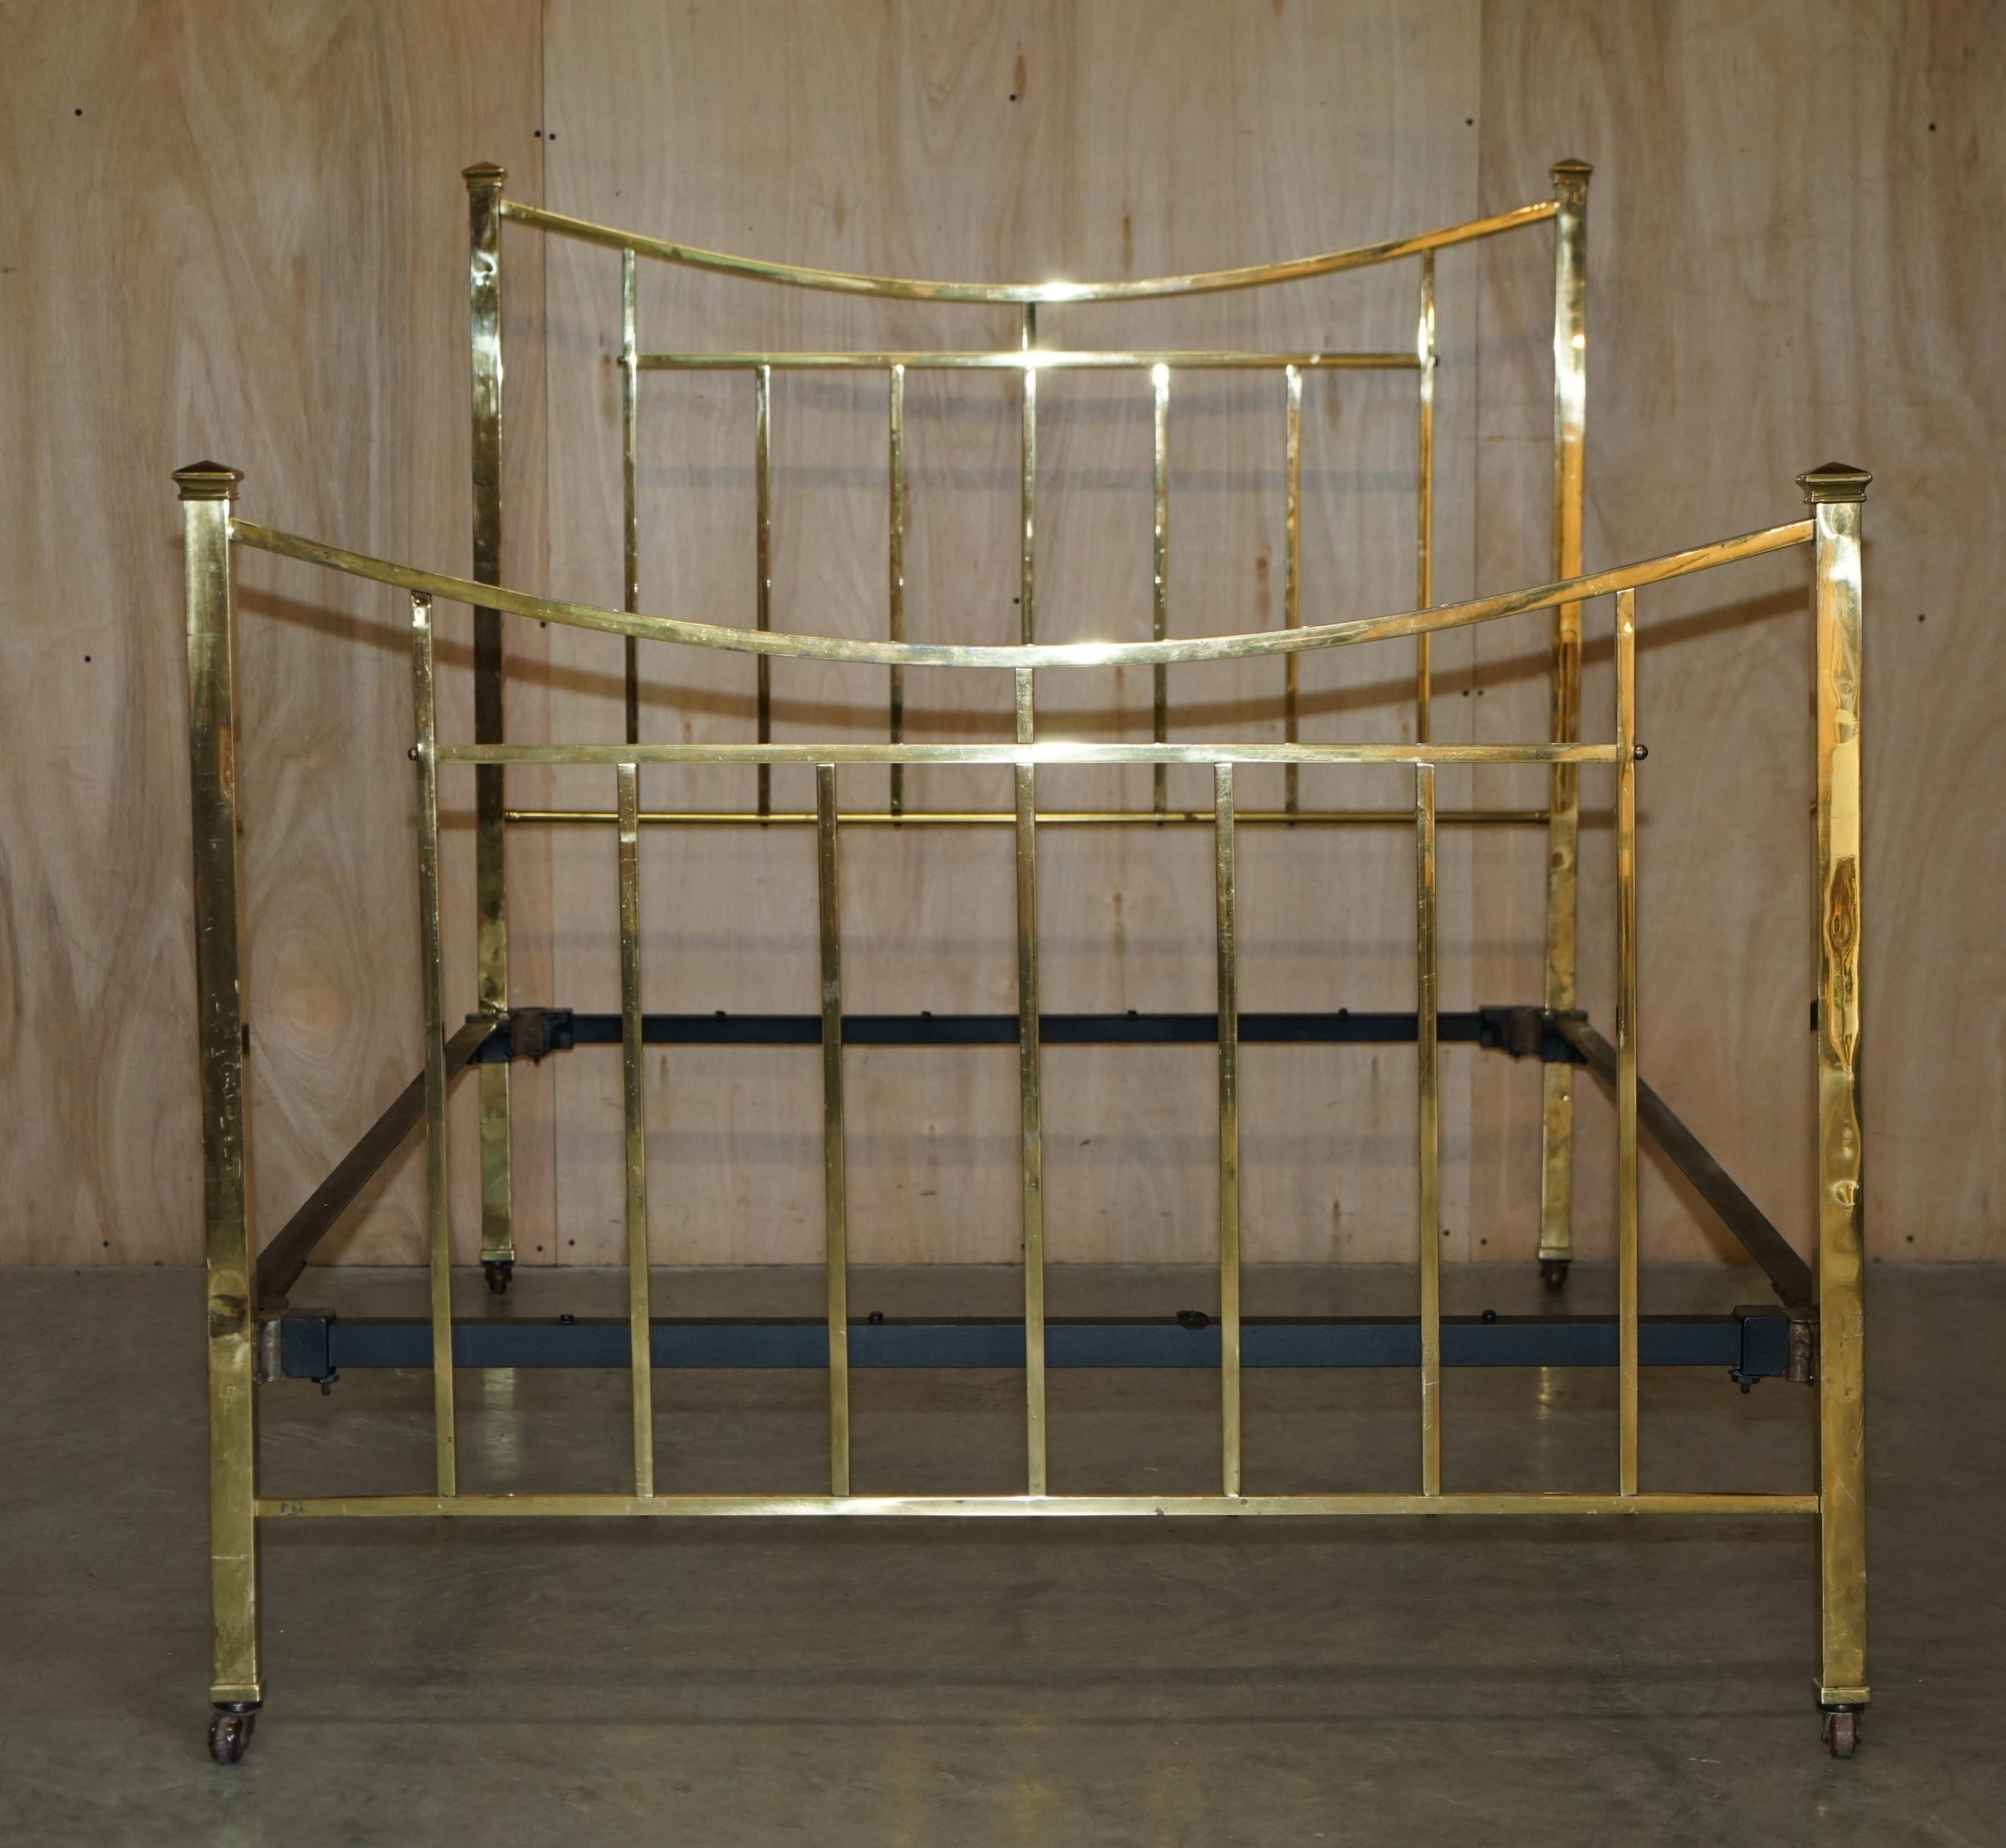 Royal House Antiques

Royal House Antiques is delighted to offer for sale this very rare original circa 1840 Victorian Brass double bed frame with period porcelain castors 

Please note the delivery fee listed is just a guide, it covers within the